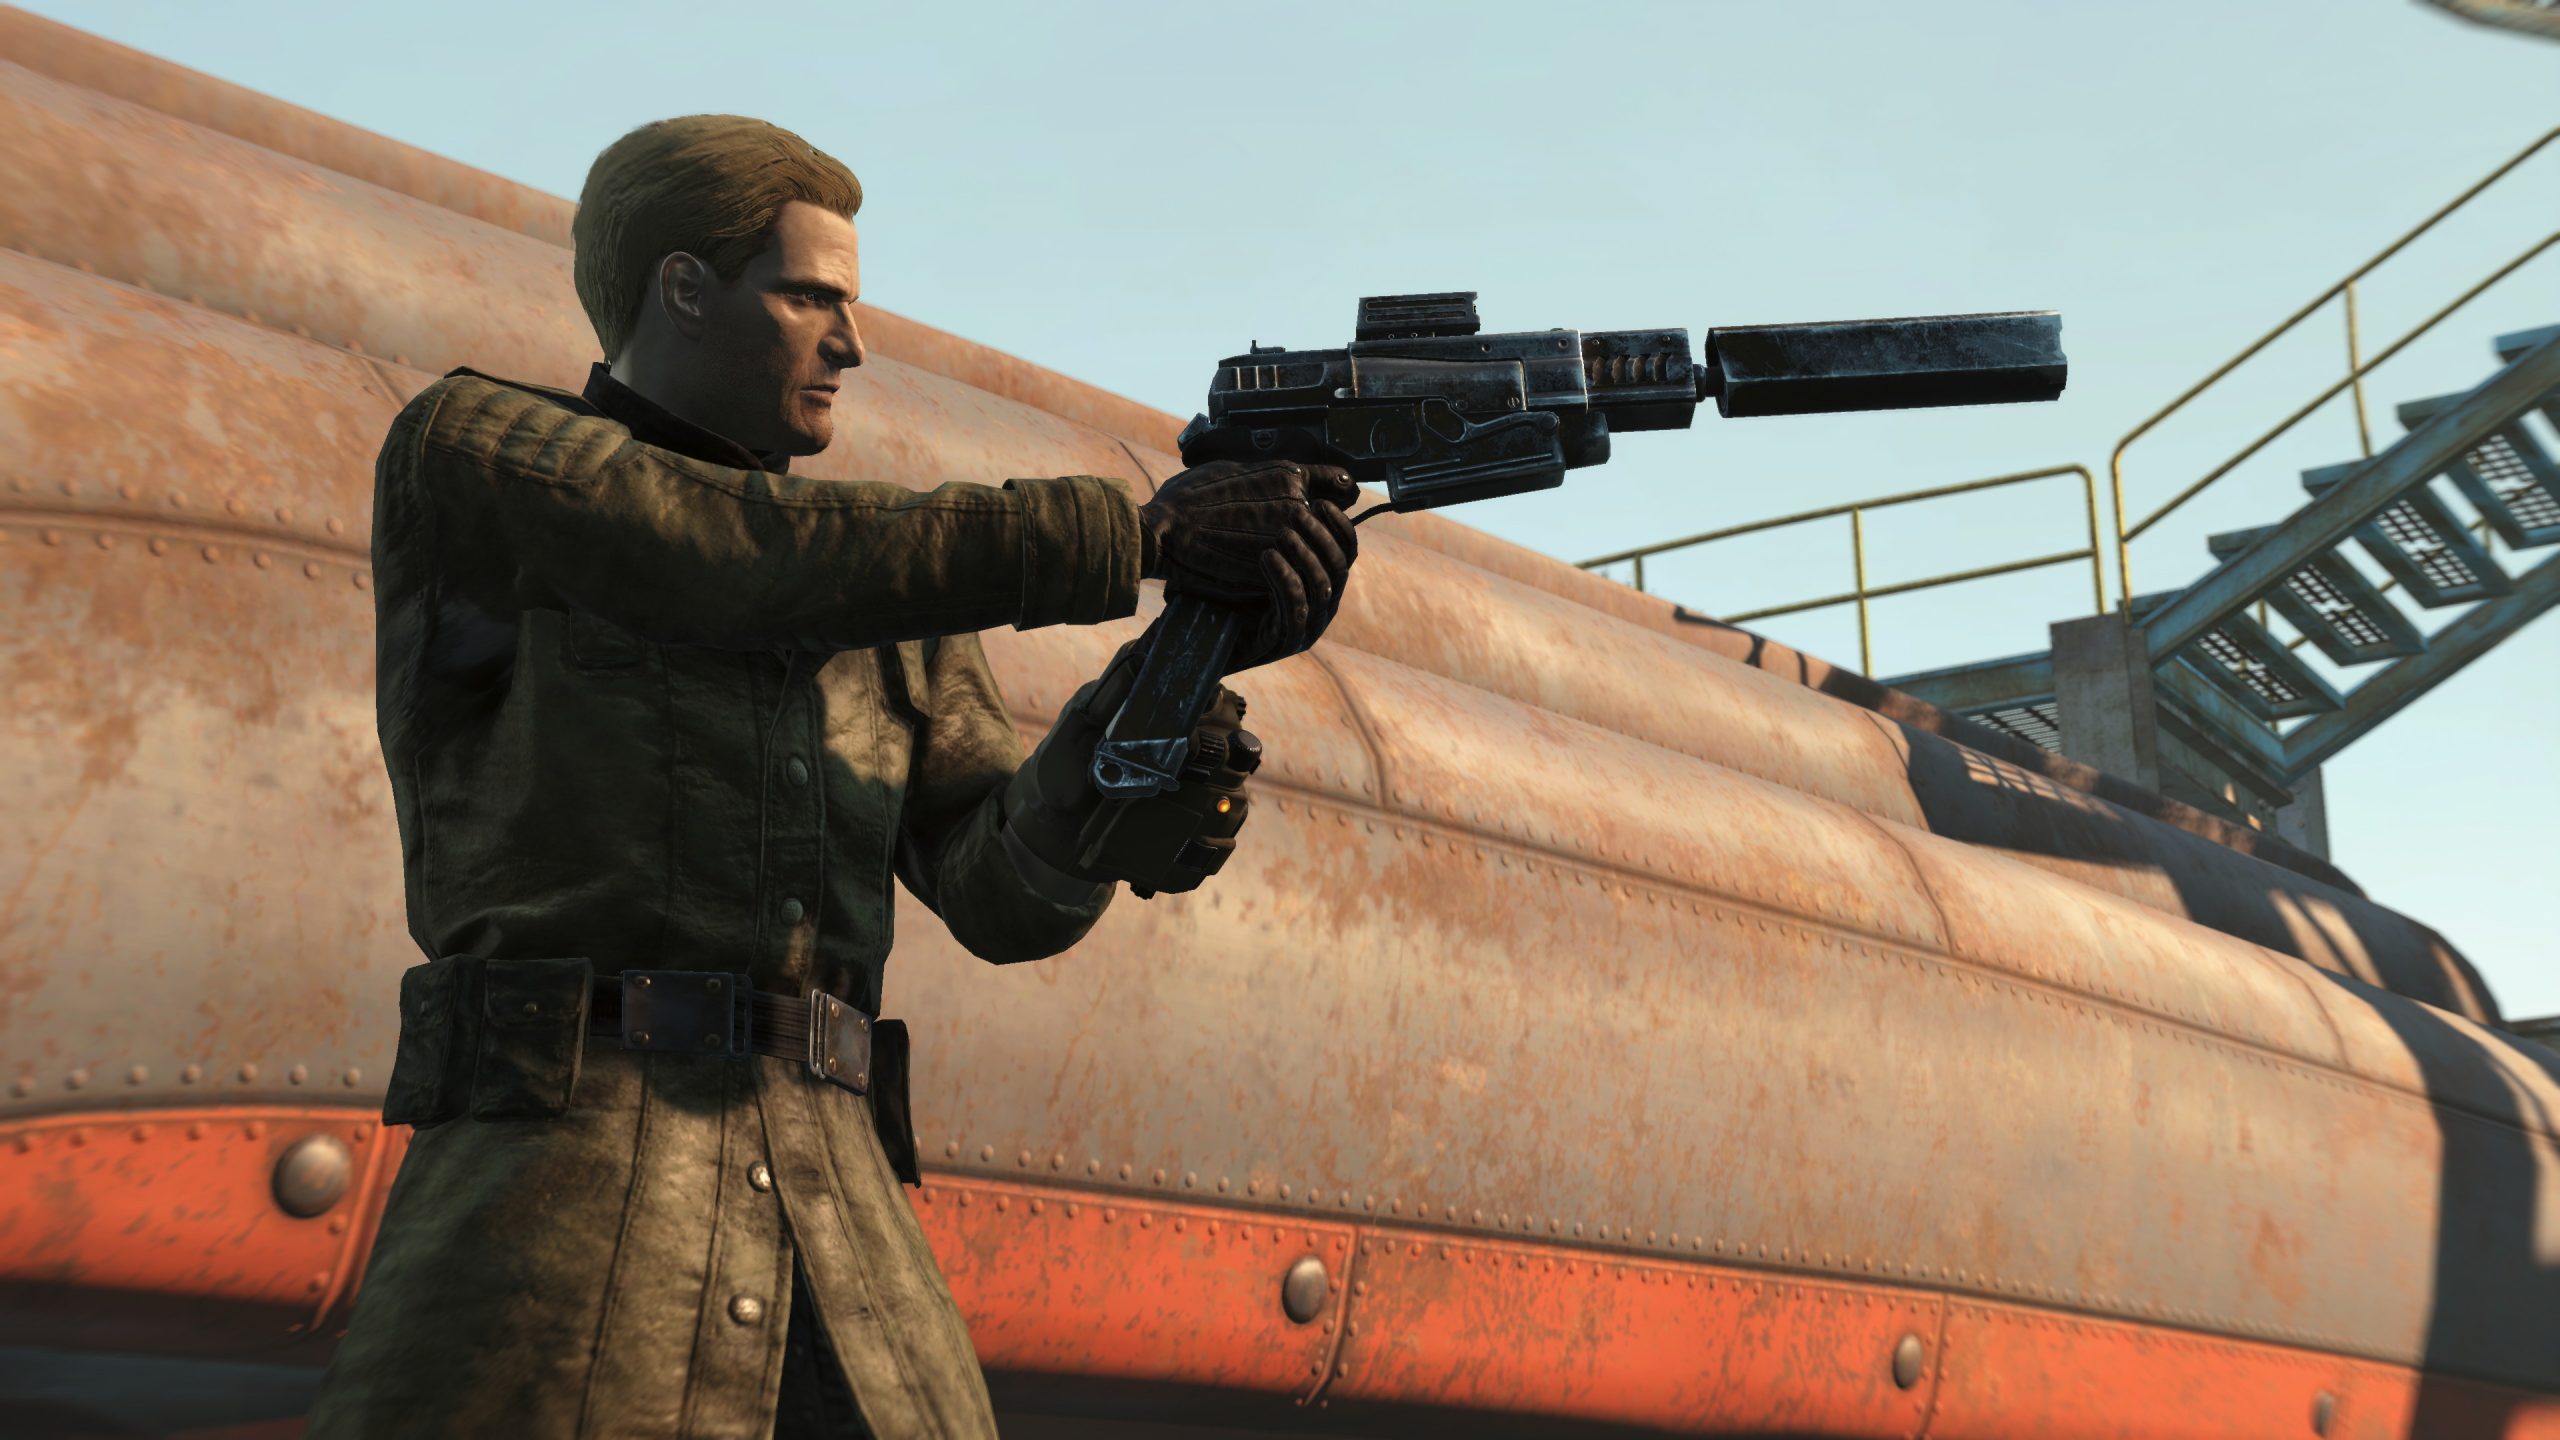 An enclave officer in a long brown coat raises his weapon, which looks like a pistol with a silencer